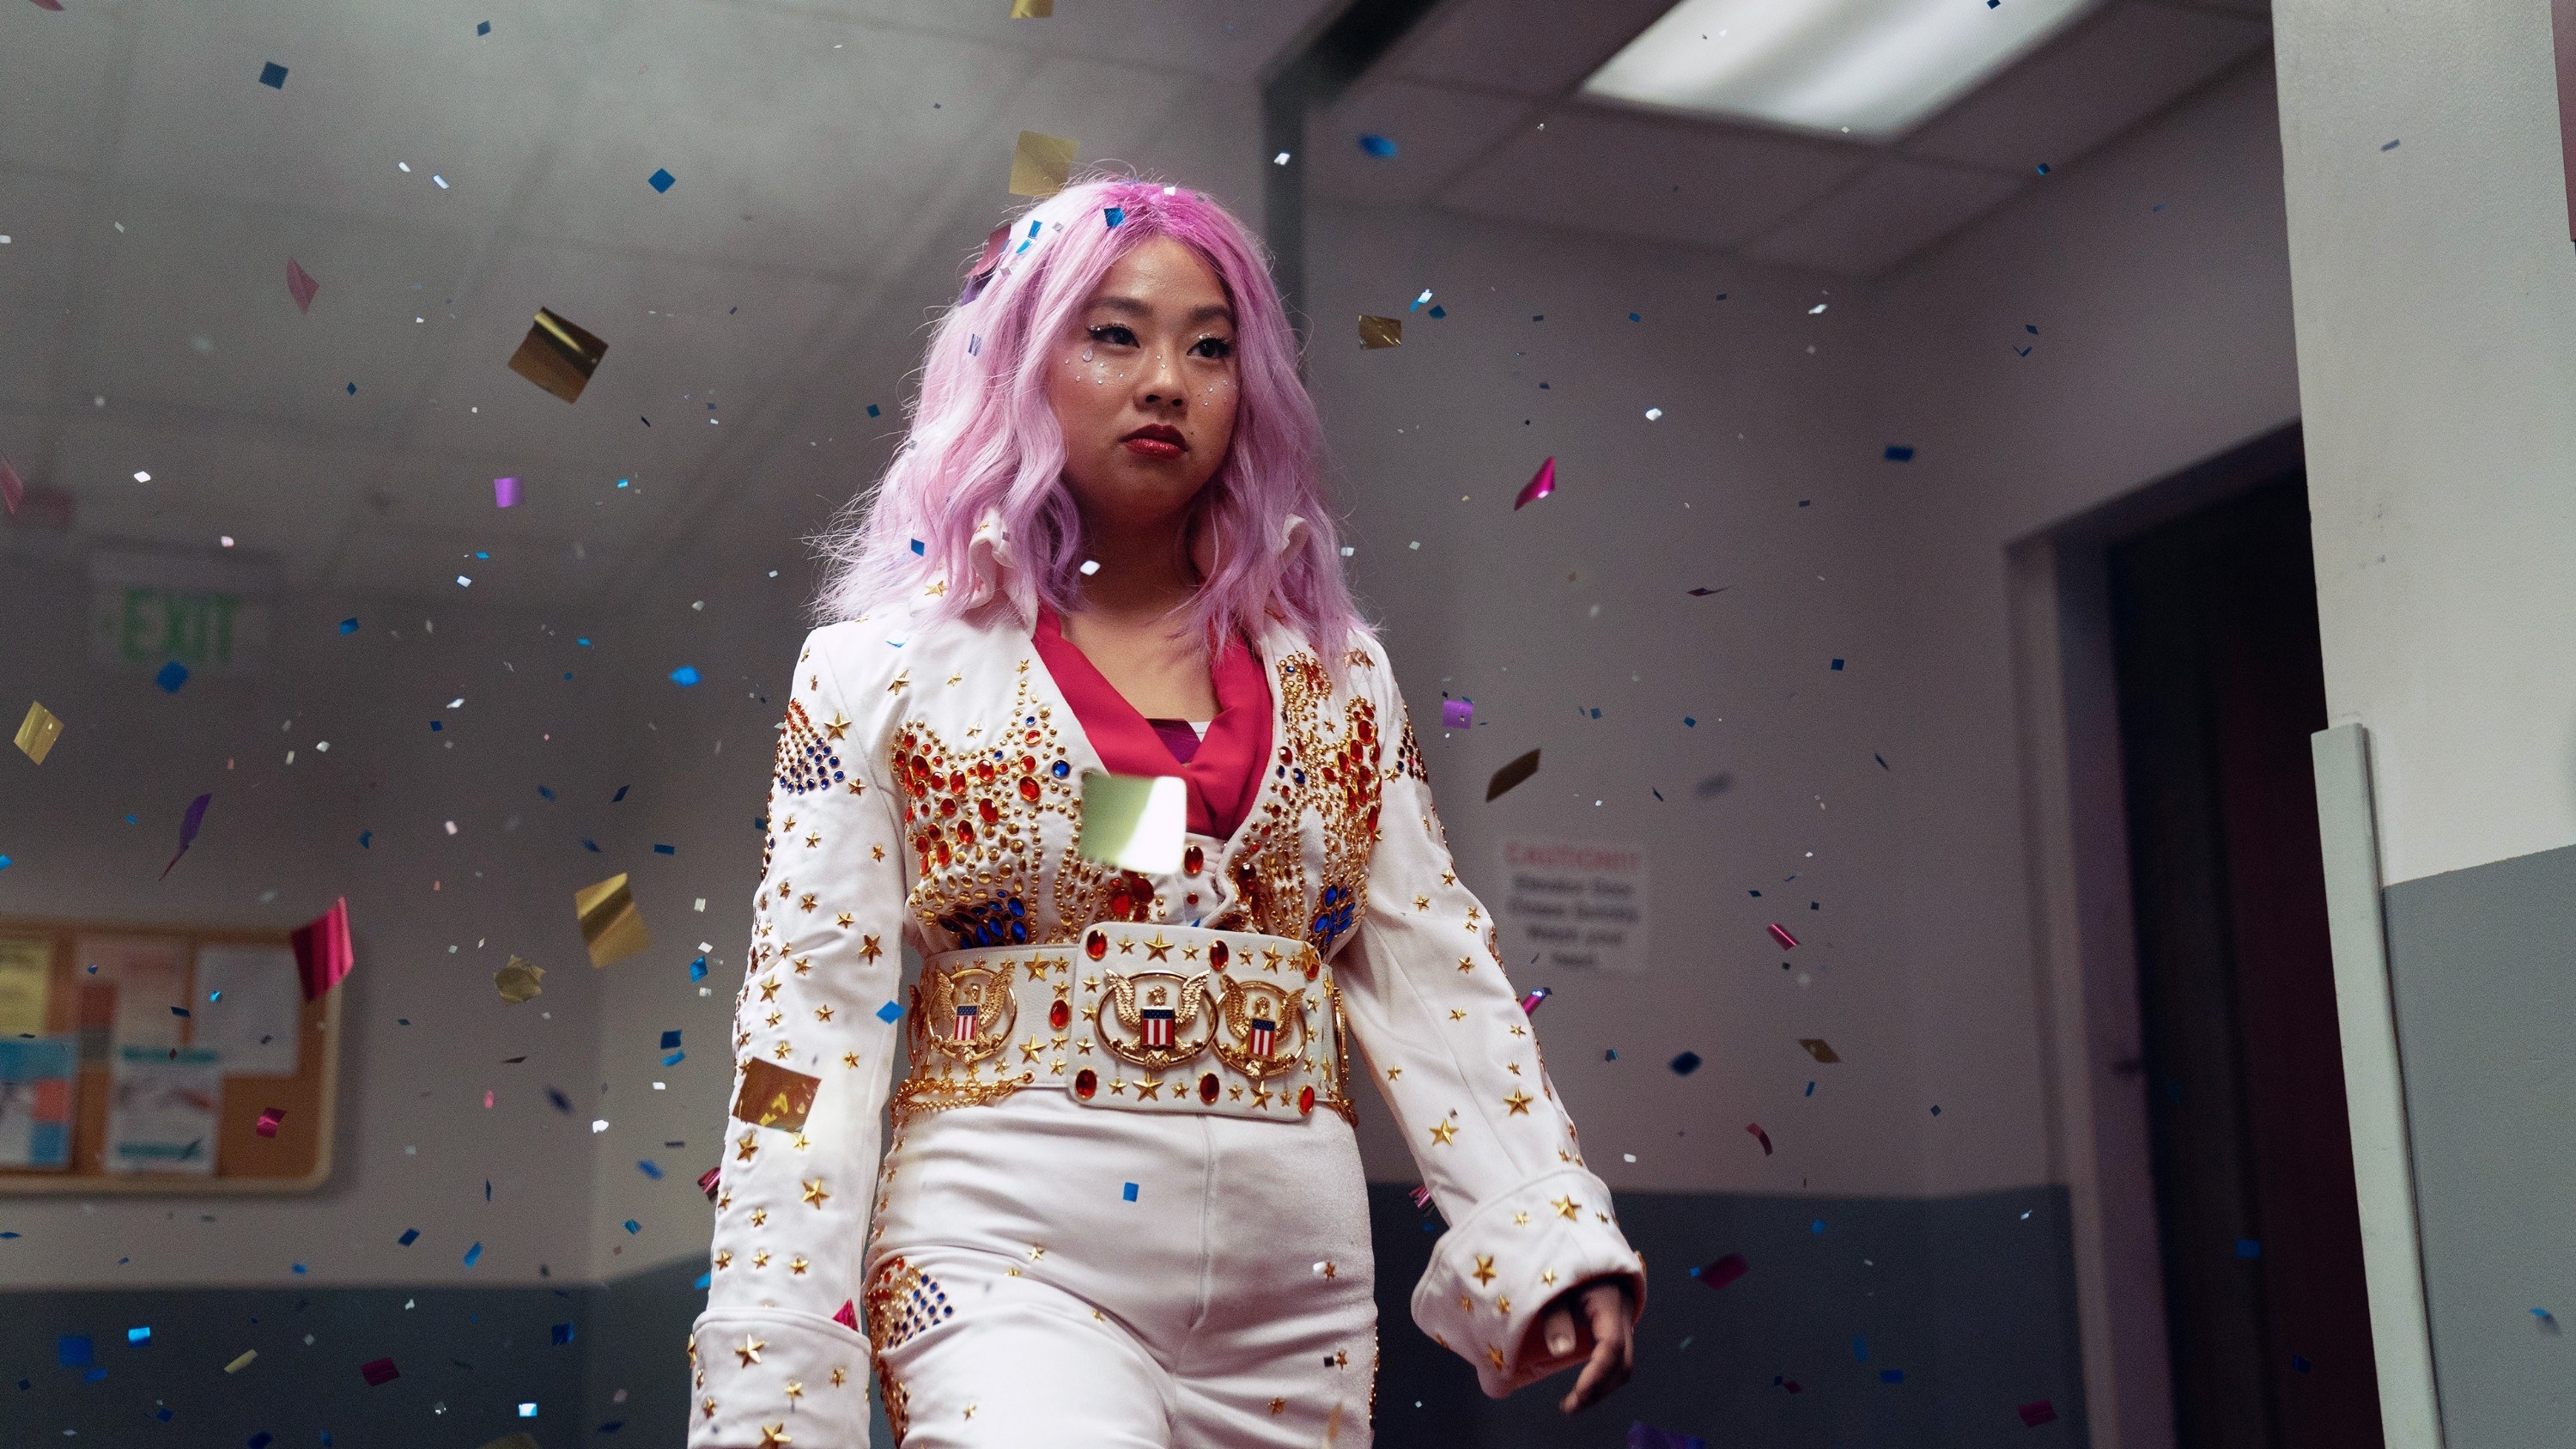 Stephanie stands in a hallway while wearing an Elvis costume while confetti falls around her in a scene from the film